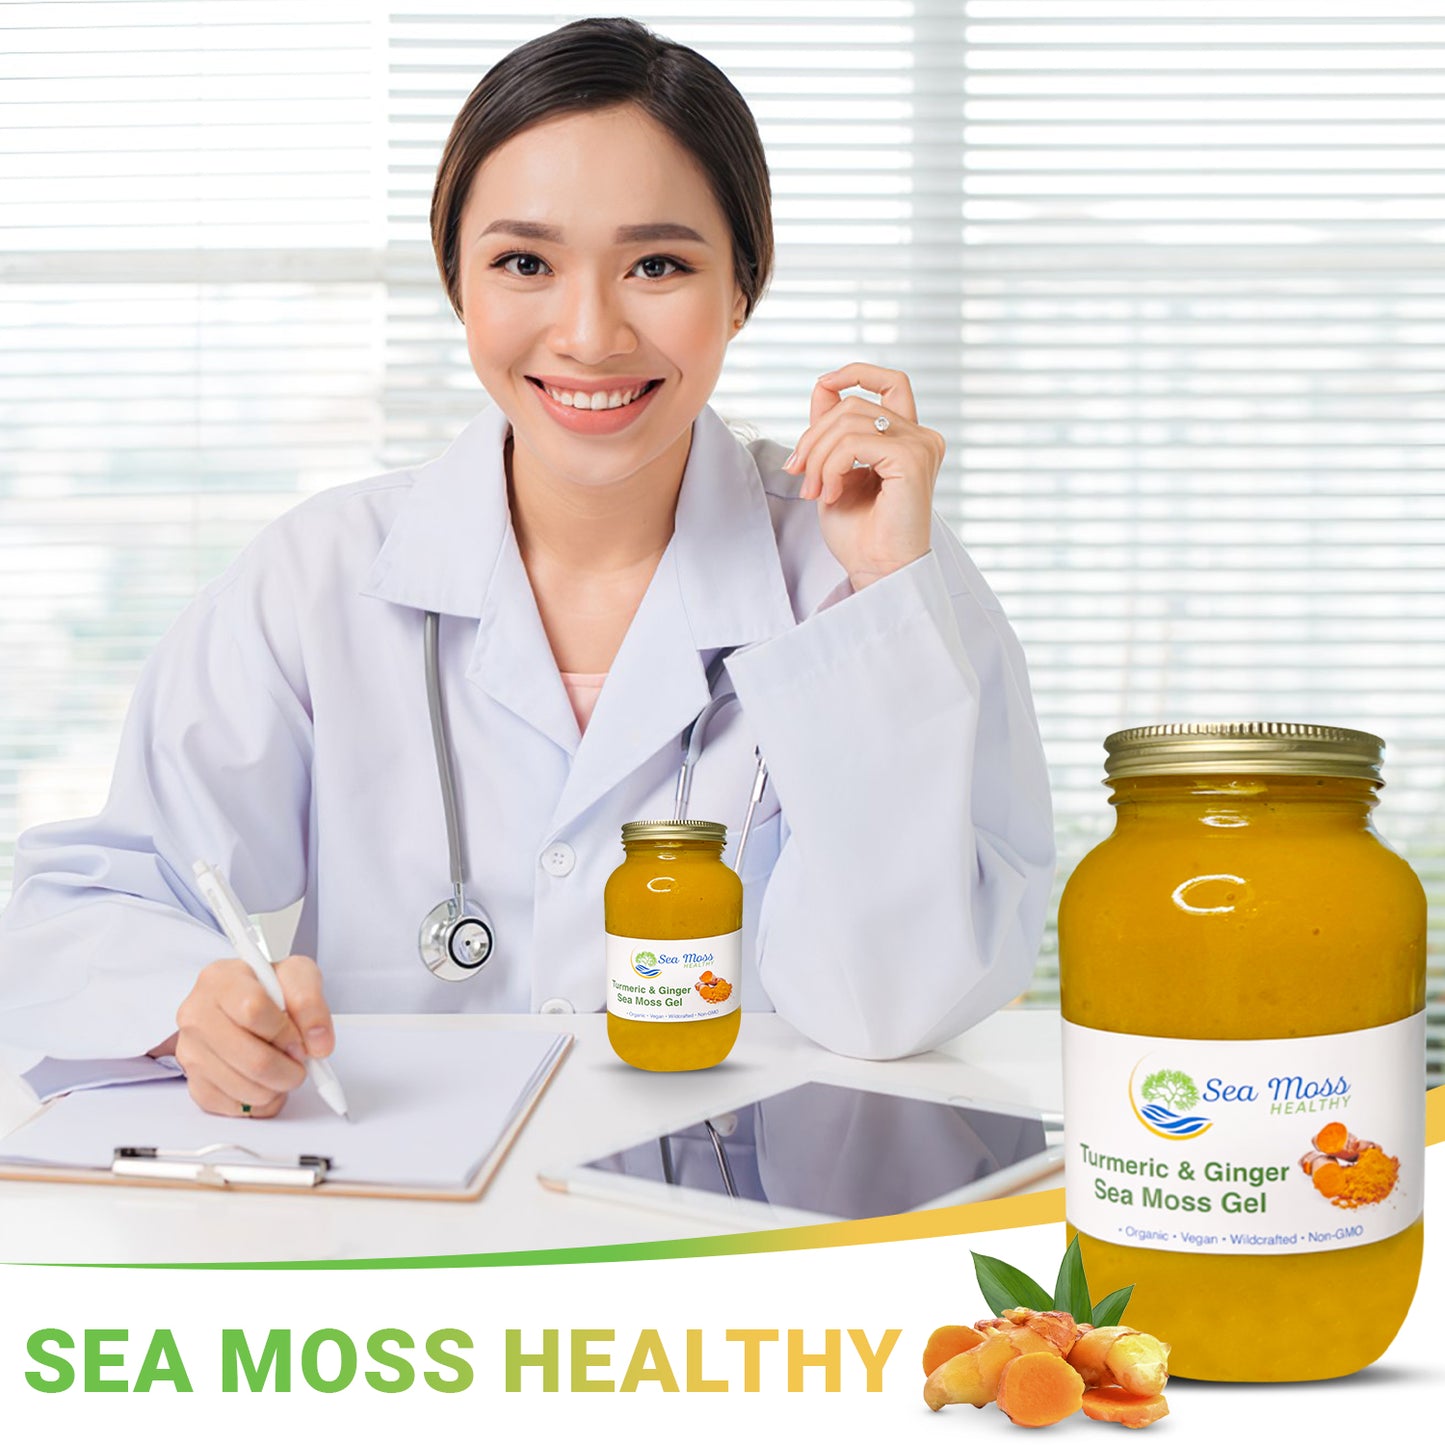 Turmeric and Ginger Flavored Sea Moss Gel